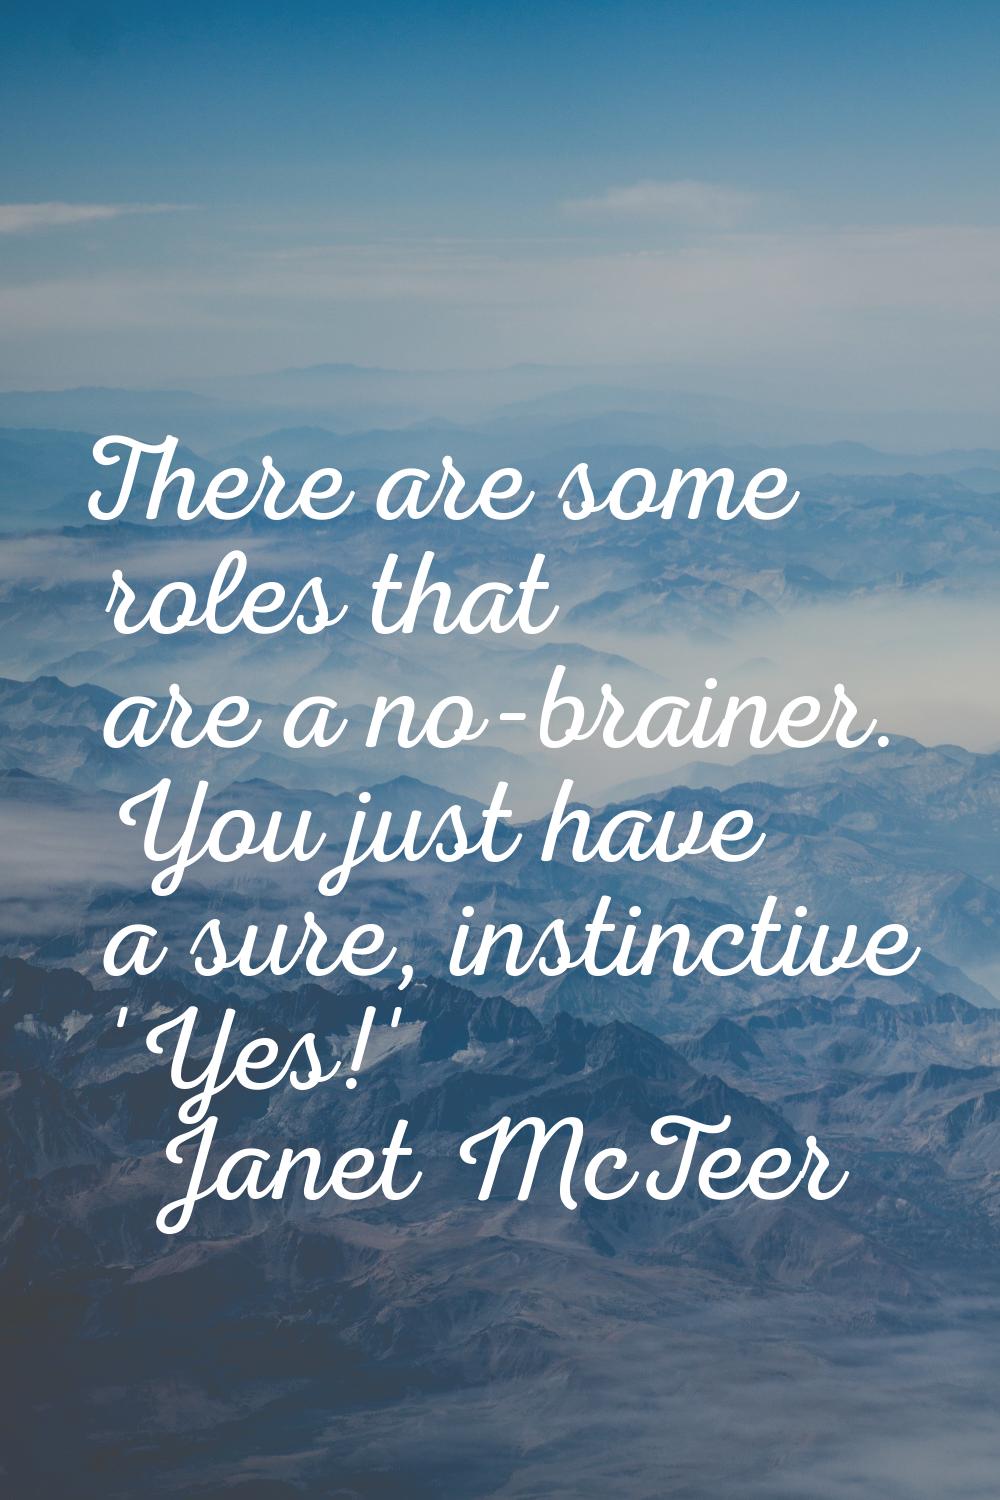 There are some roles that are a no-brainer. You just have a sure, instinctive 'Yes!'